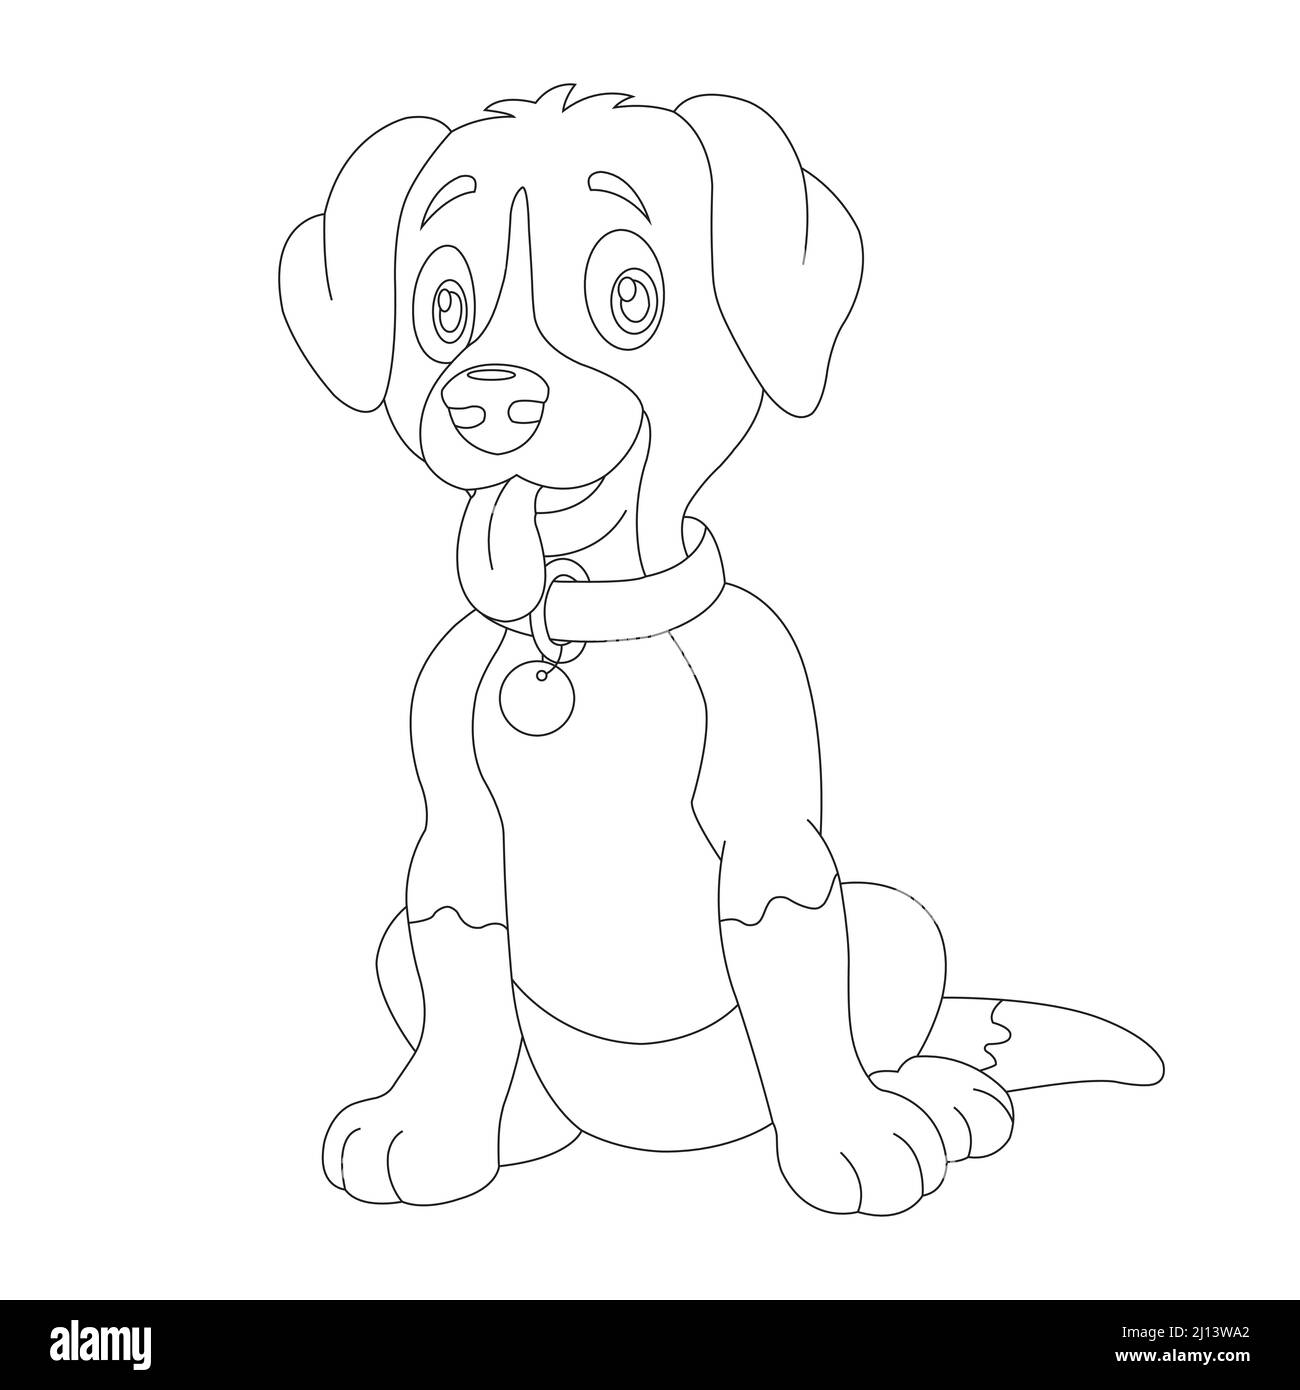 Cute puppy dog outline coloring page for kids animal coloring book cartoon vector illustration Stock Vector